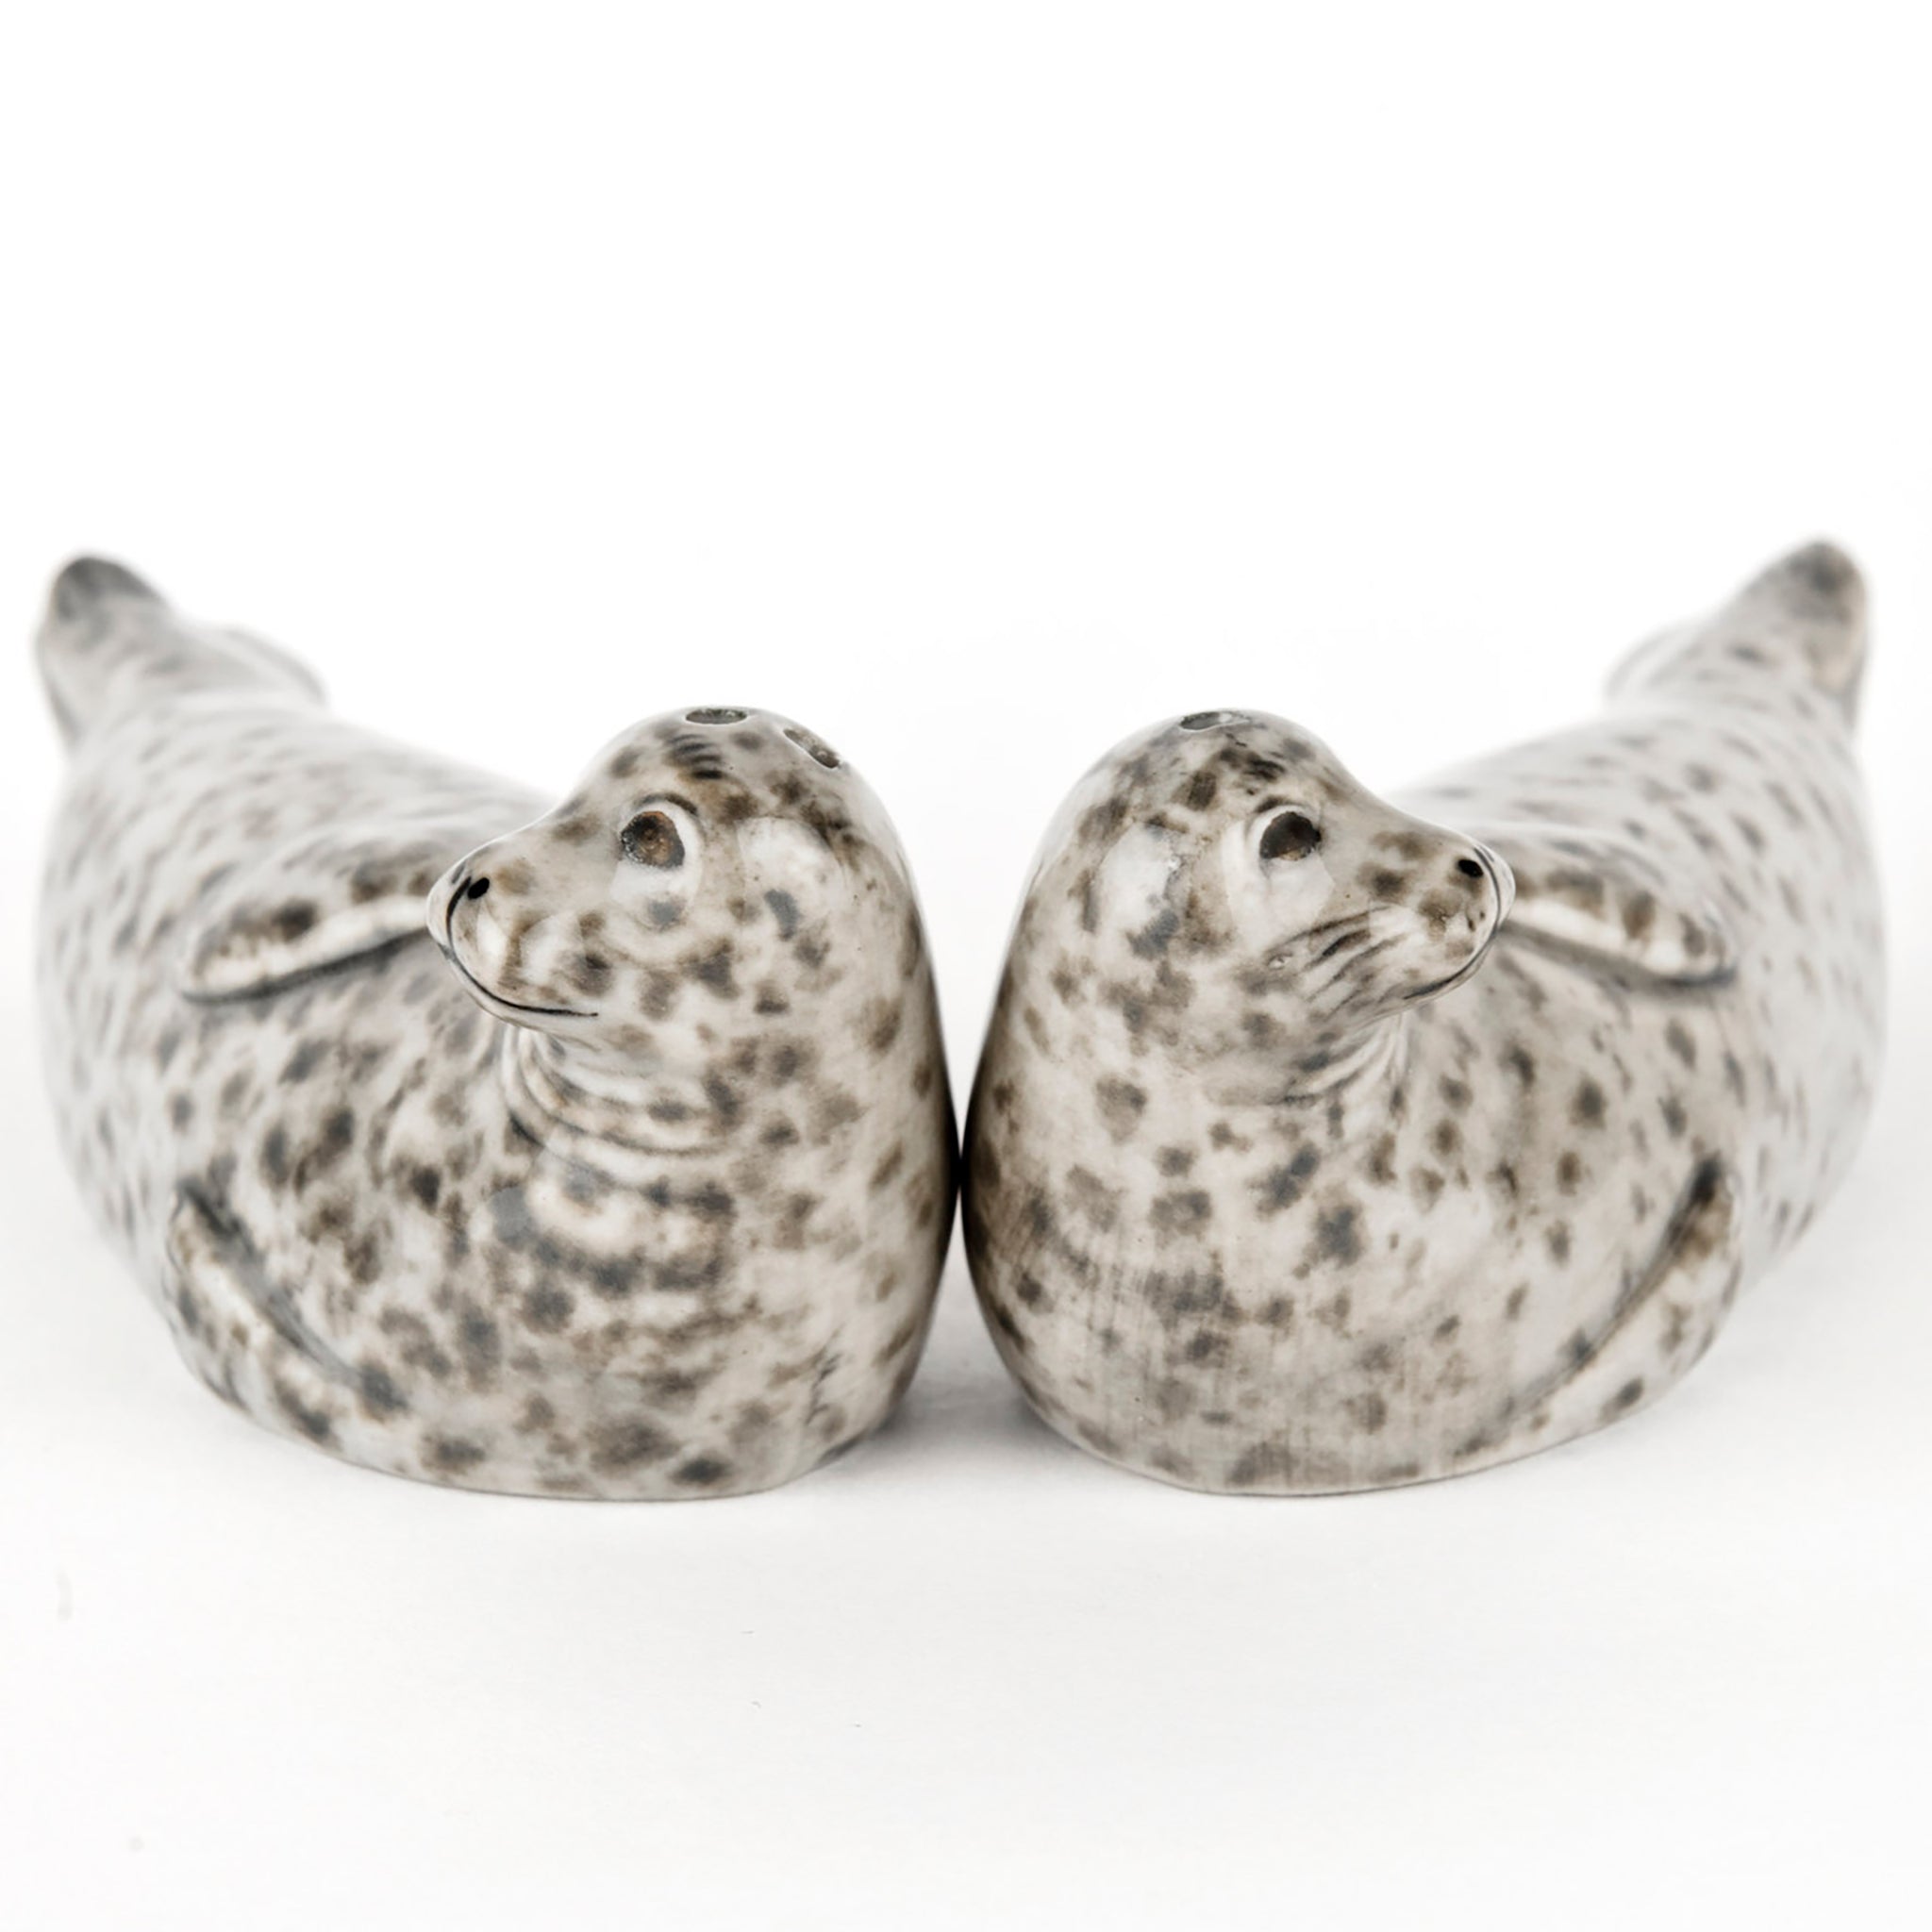 Front view of a pair of glazed ceramic salt and pepper shakers in the shape of grey spotted seals